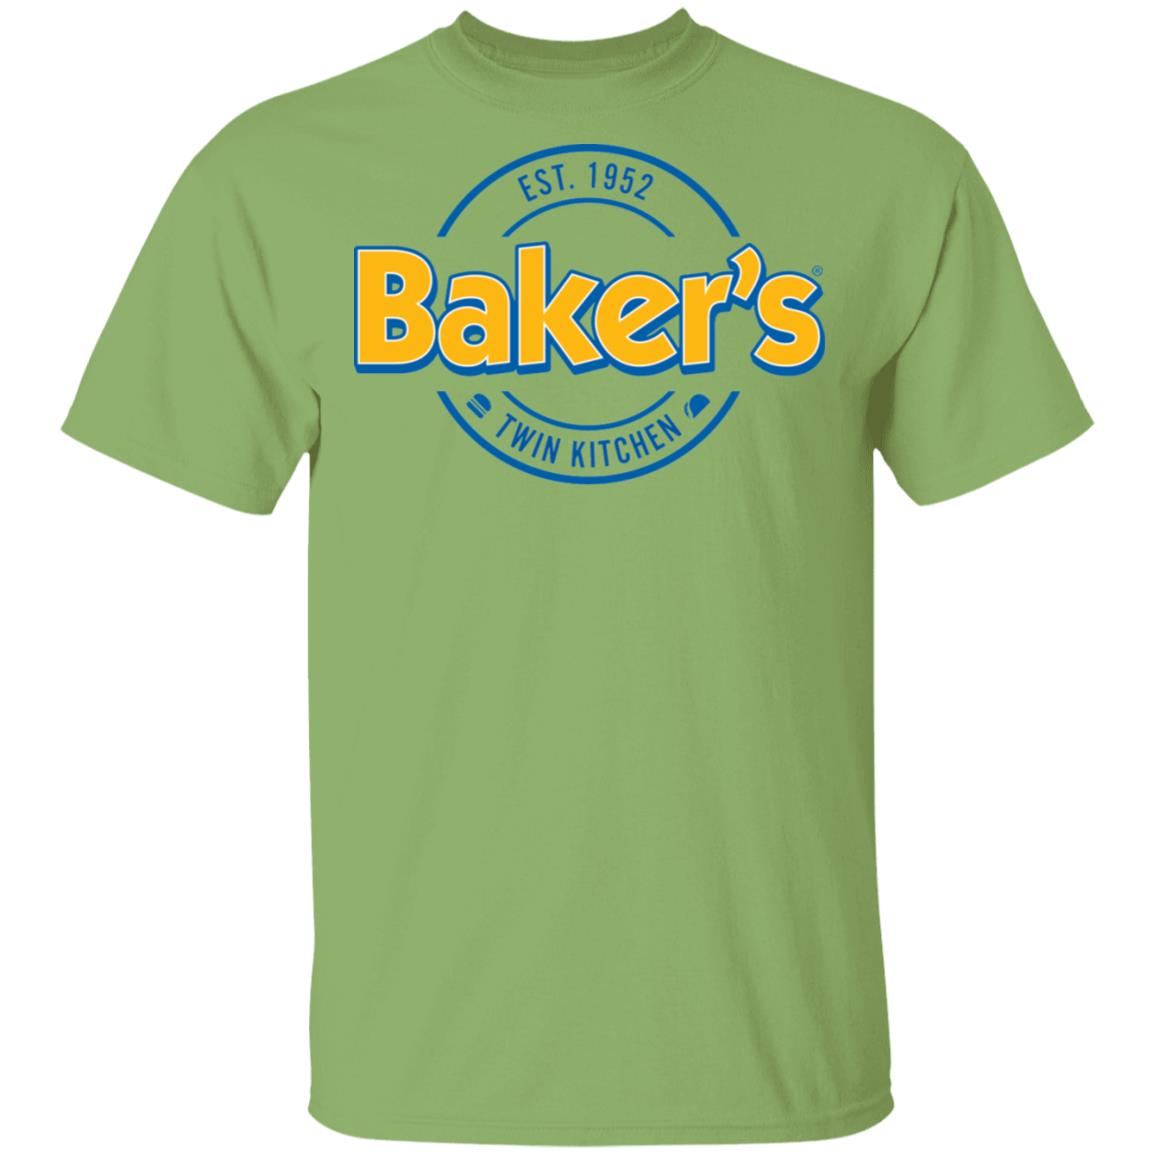 Bakers6